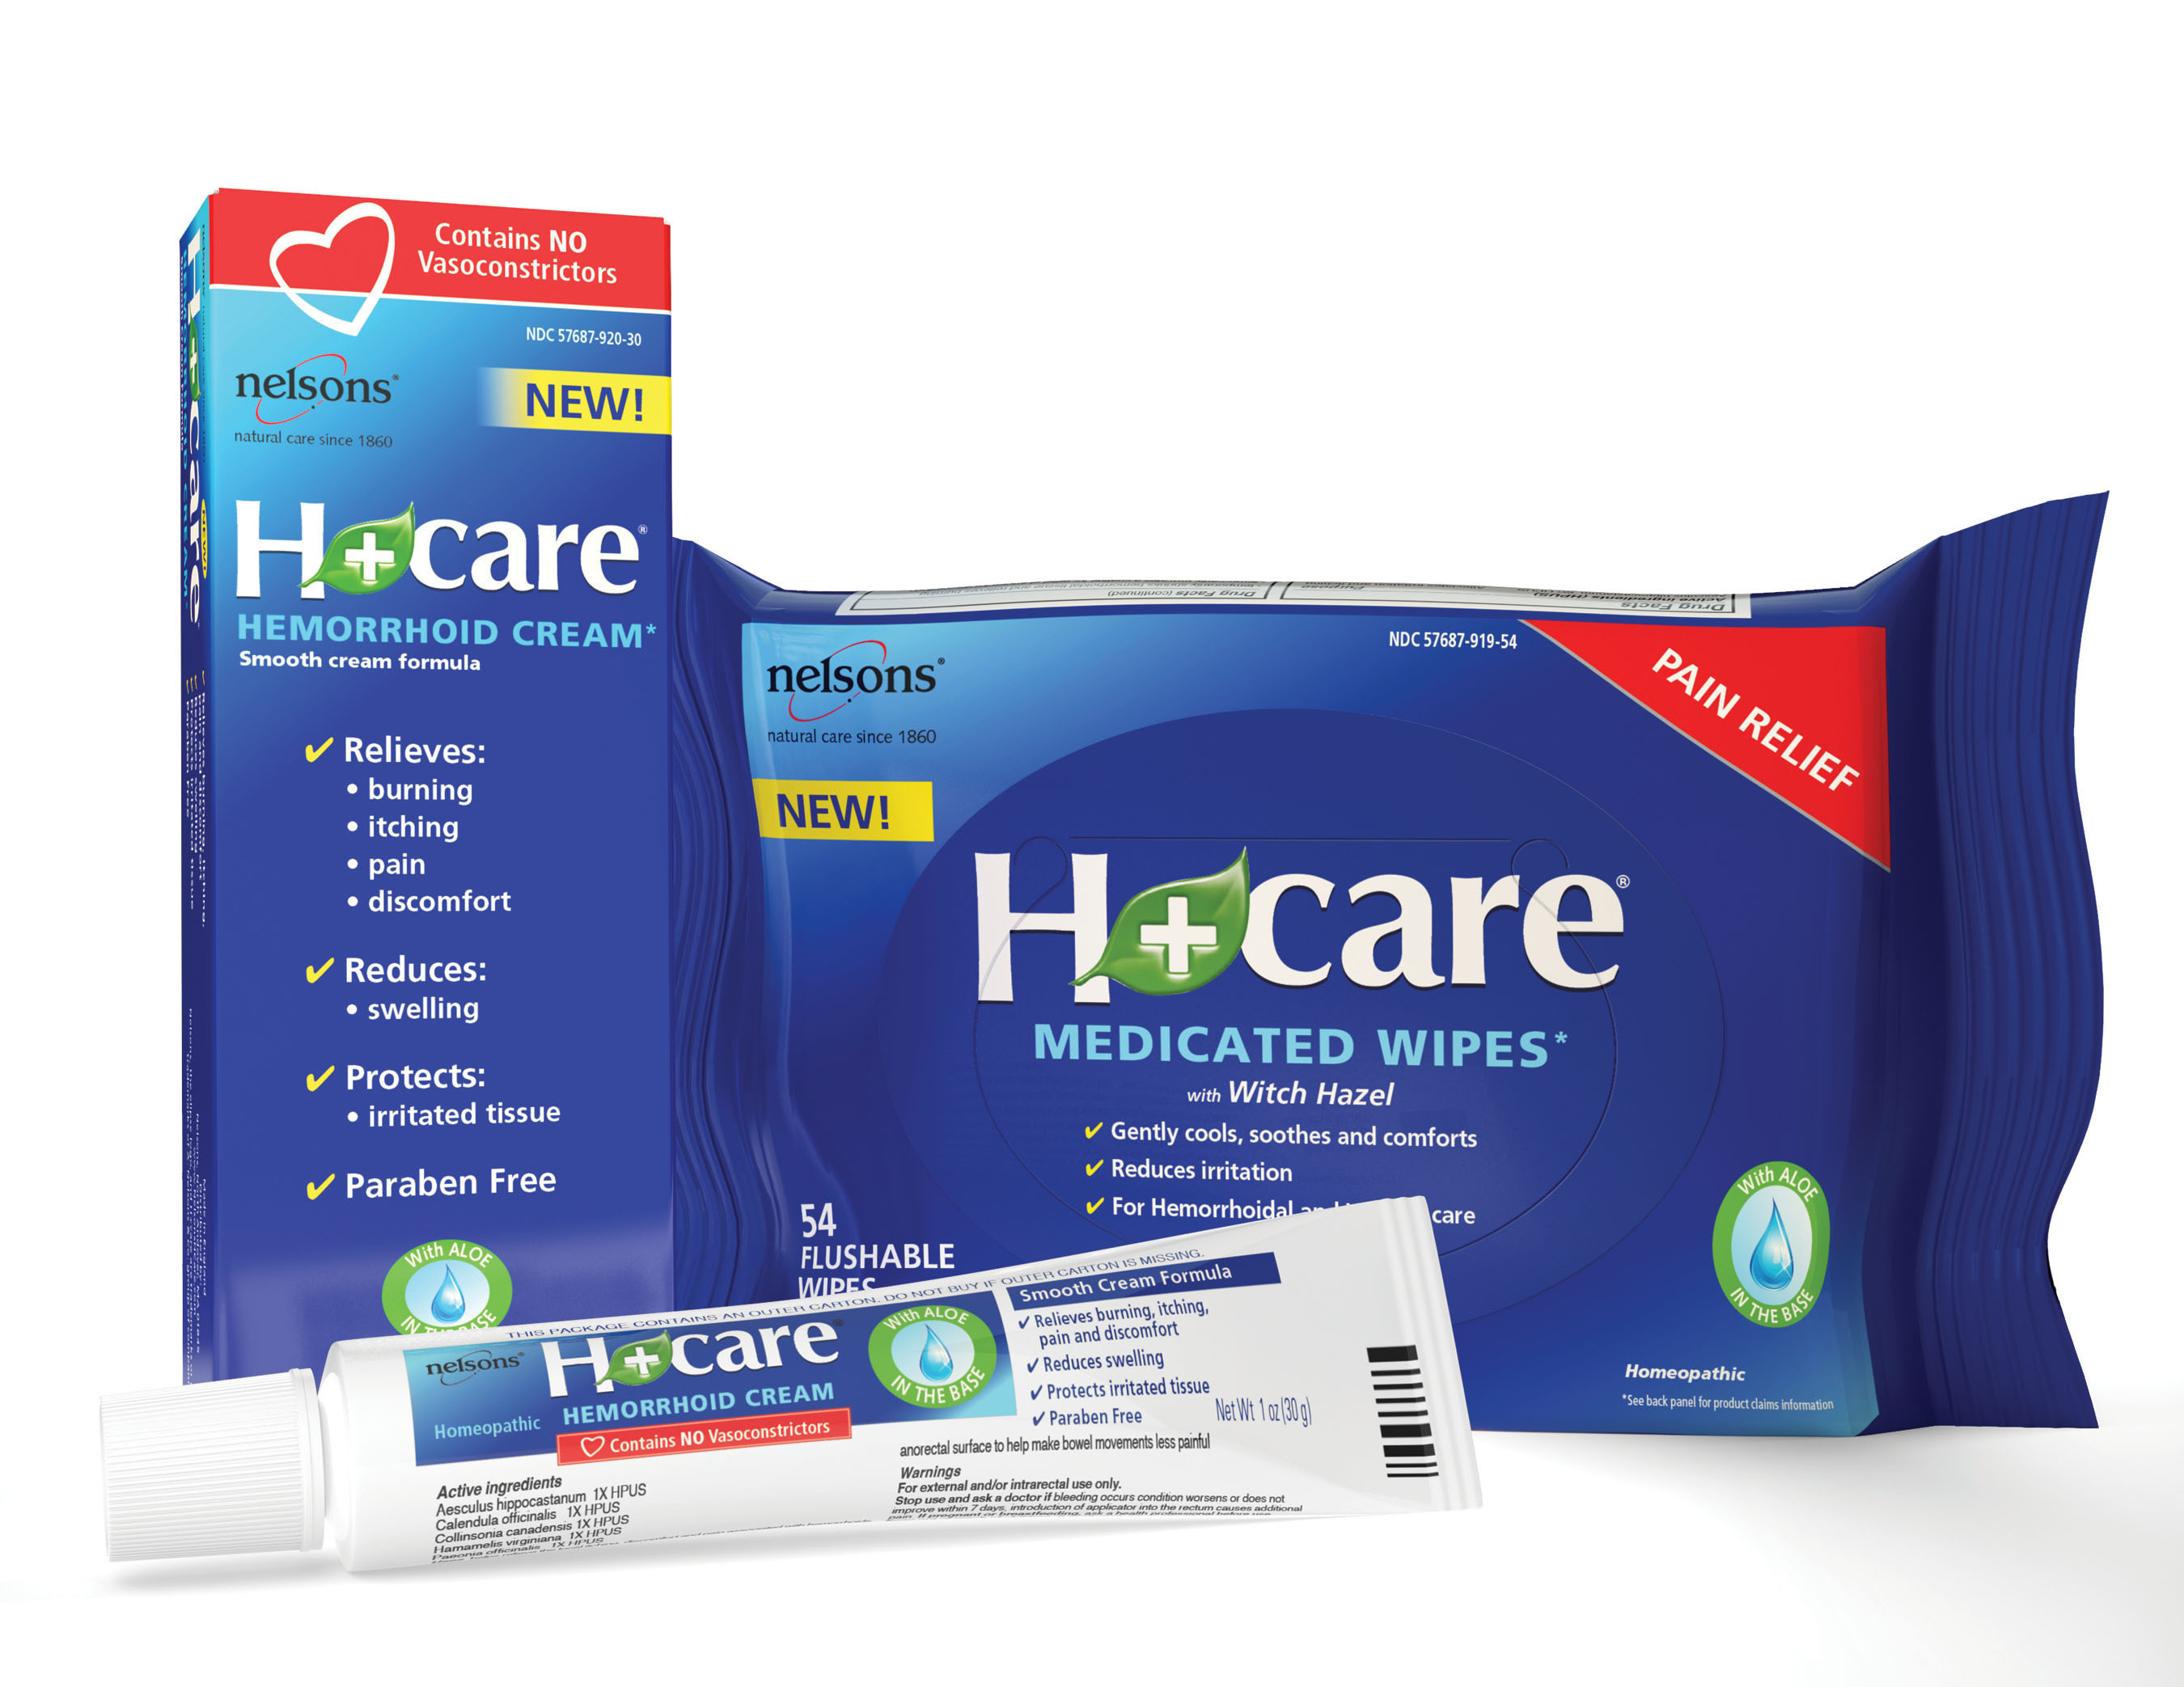 New H care Hemorrhoid Cream provides soothing relief from hemorrhoid pain, itching and burning without the use of vasoconstrictors, steroids, anesthetics or parabens. (PRNewsFoto/Nelsons) (PRNewsFoto/NELSONS)